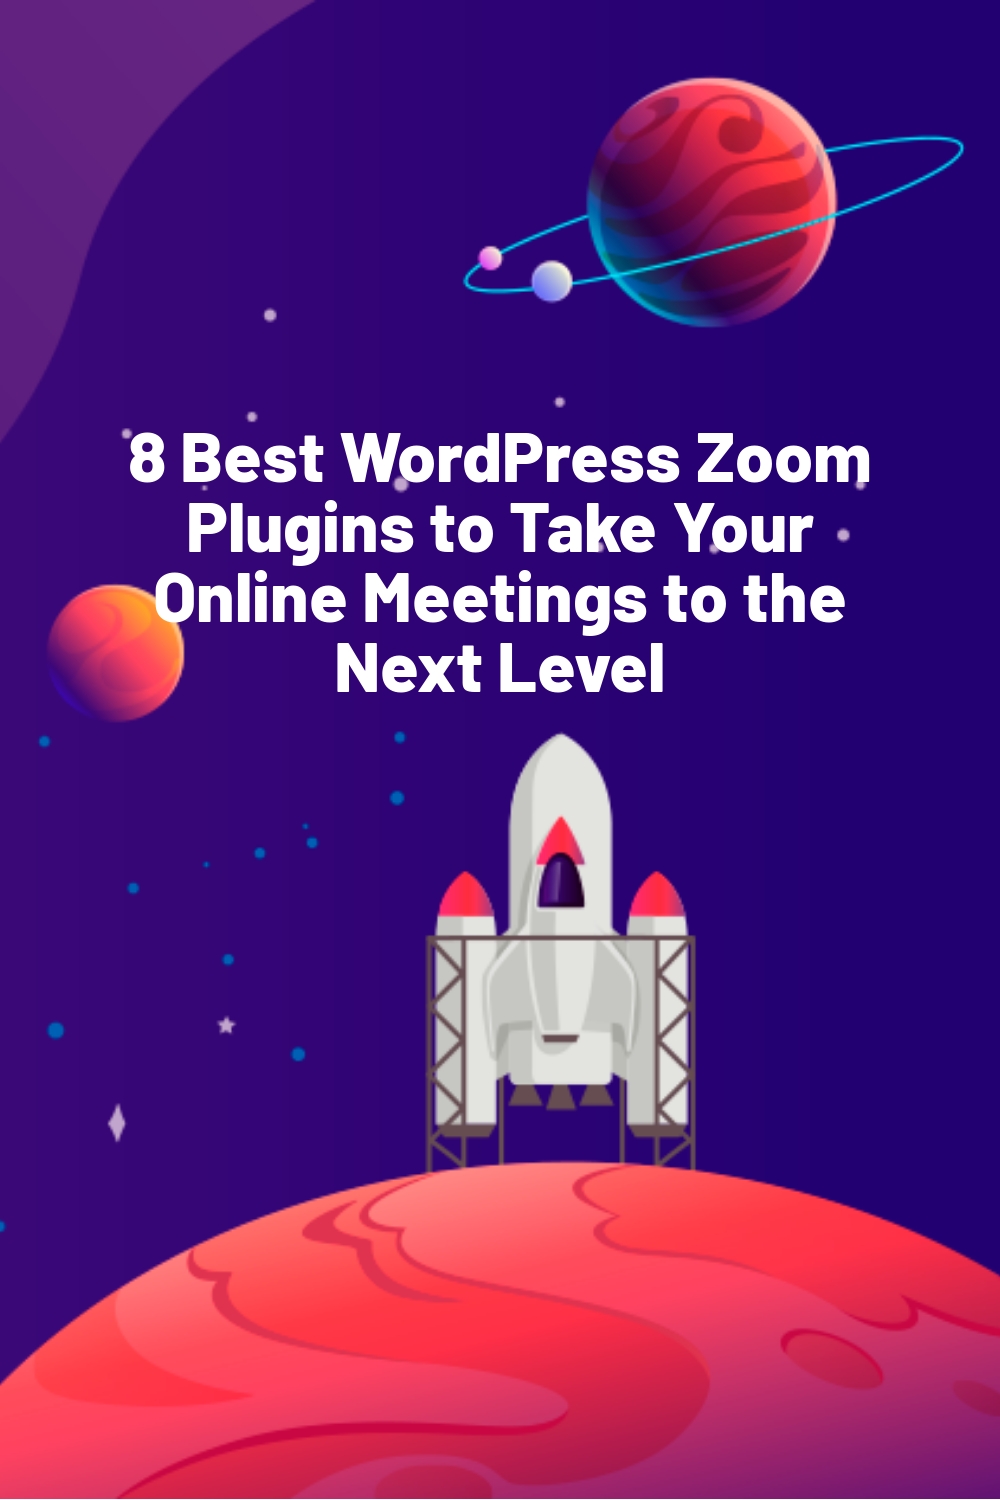 8 Best WordPress Zoom Plugins to Take Your Online Meetings to the Next Level